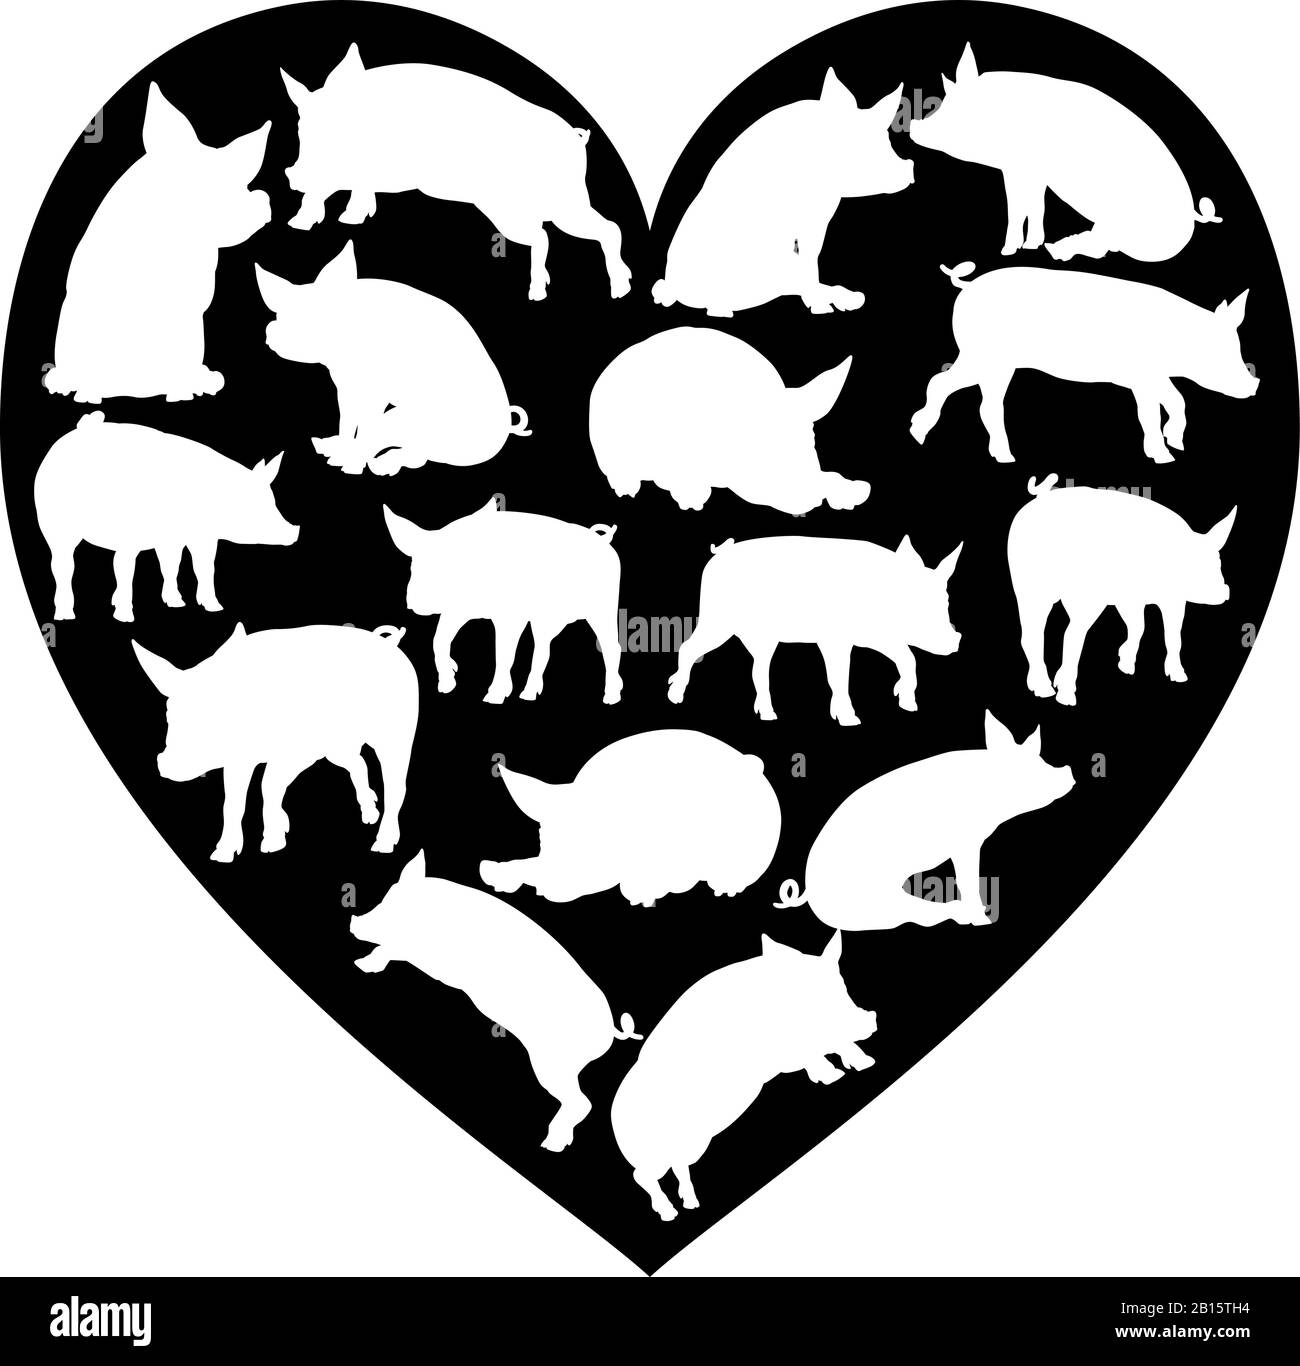 Pig Heart Silhouette Concept Stock Vector